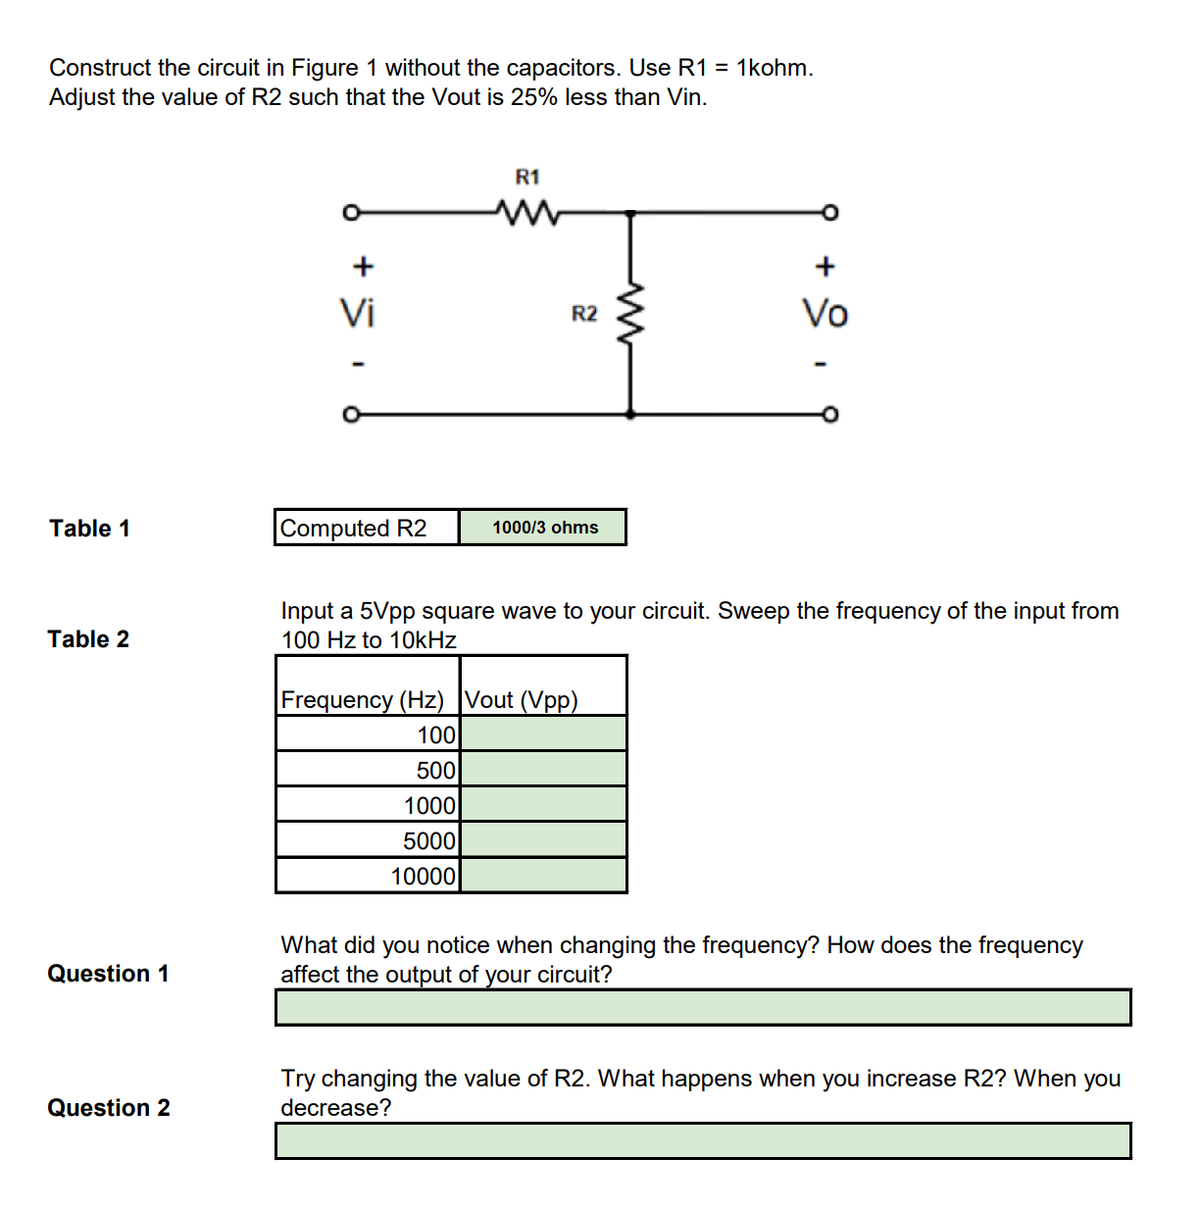 Construct the circuit in Figure 1 without the capacitors. Use R1 = 1kohm.
Adjust the value of R2 such that the Vout is 25% less than Vin.
Table 1
Table 2
Question 1
Question 2
Vi
Computed R2
R1
R2
1000/3 ohms
Vo
Input a 5Vpp square wave to your circuit. Sweep the frequency of the input from
100 Hz to 10kHz
Frequency (Hz) Vout (Vpp)
100
500
1000
5000
10000
What did you notice when changing the frequency? How does the frequency
affect the output of your circuit?
Try changing the value of R2. What happens when you increase R2? When you
decrease?